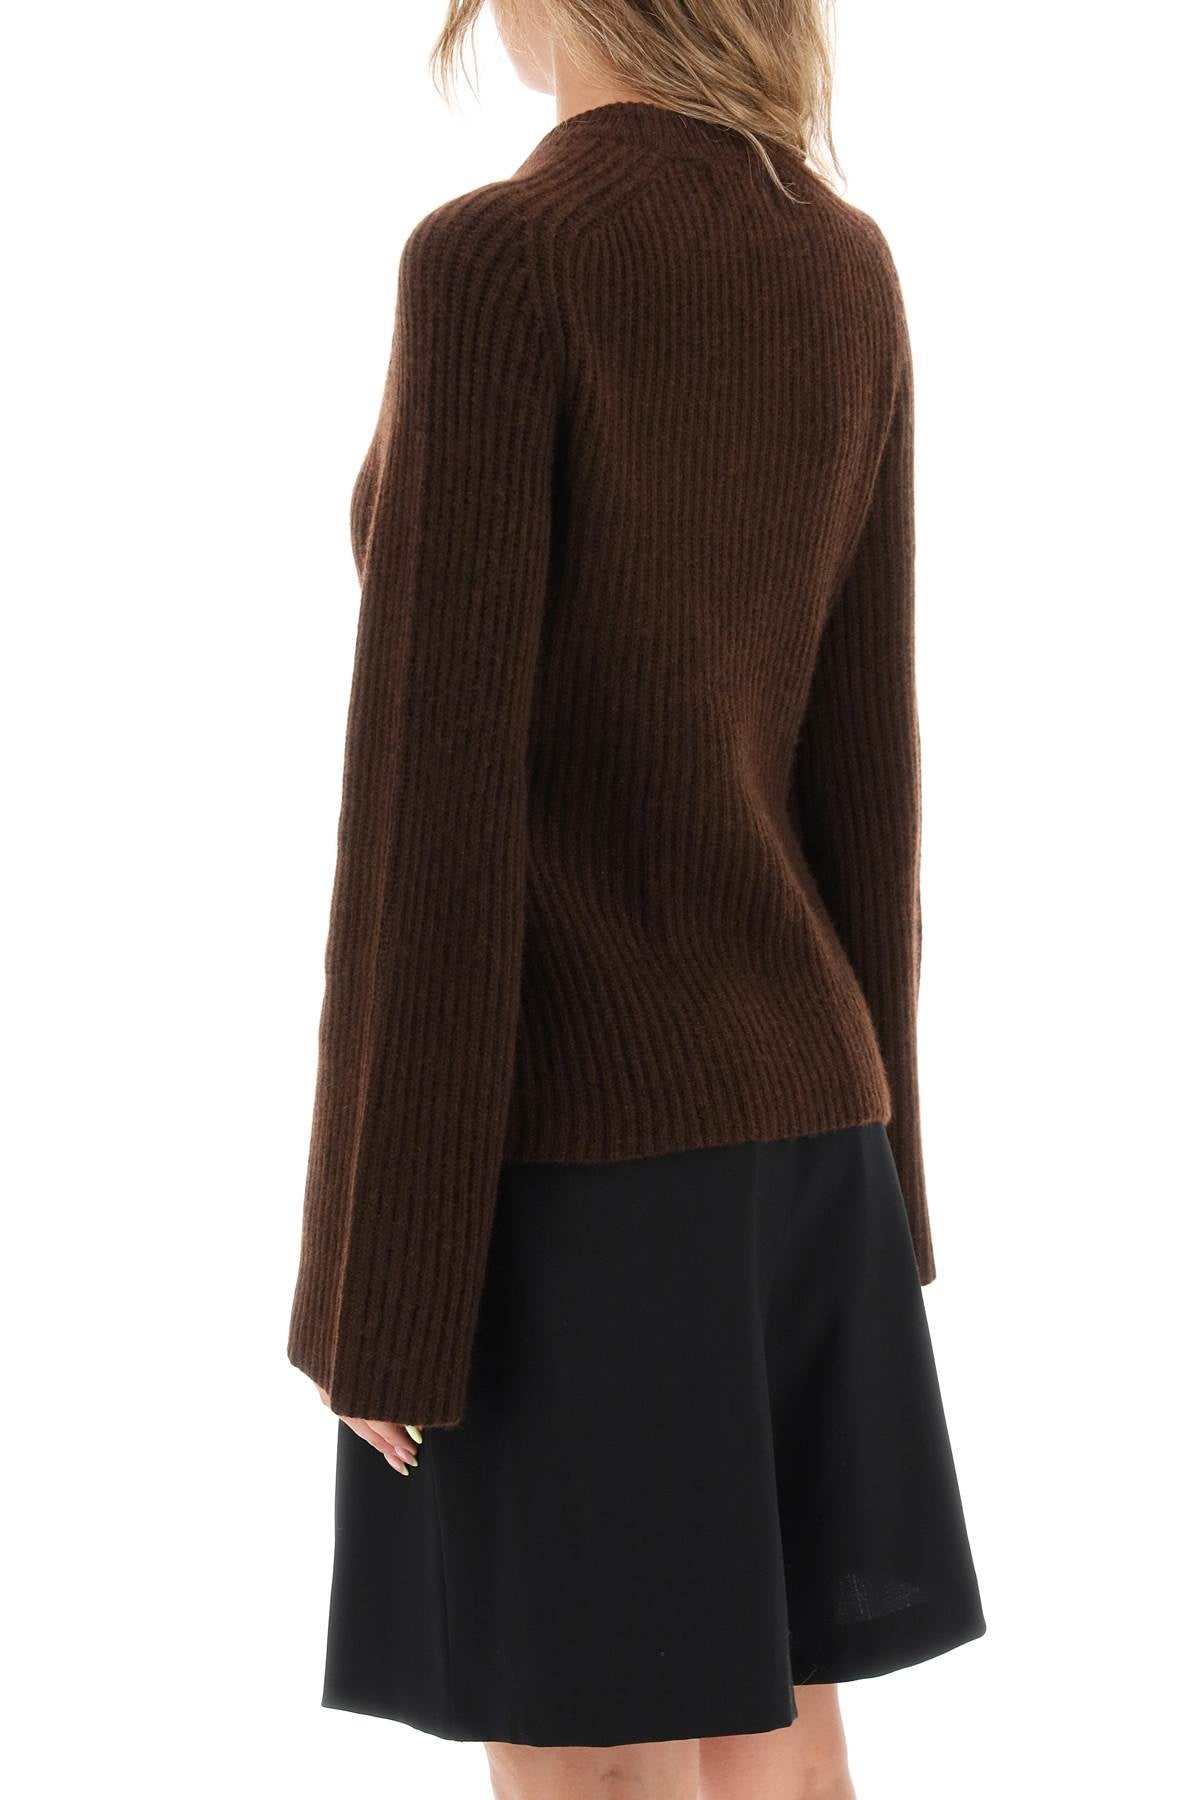 Loulou studio 'kota' cashmere sweater with bell sleeves-2